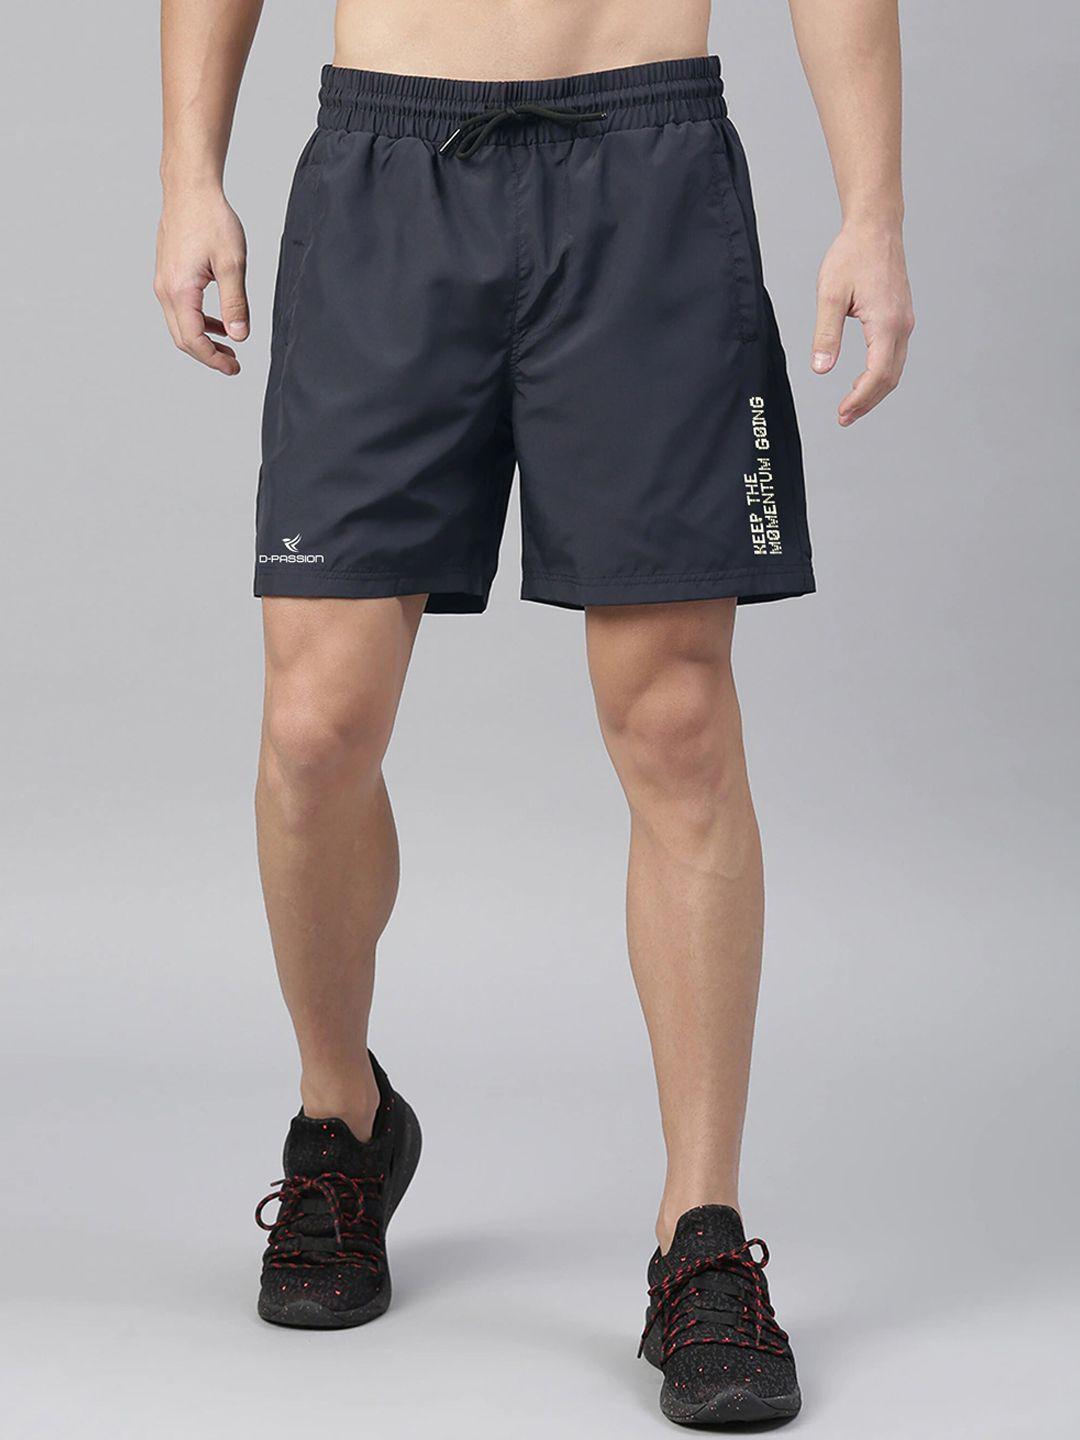 dpassion-men-navy-blue-training-or-gym-rapid-dry-sports-shorts